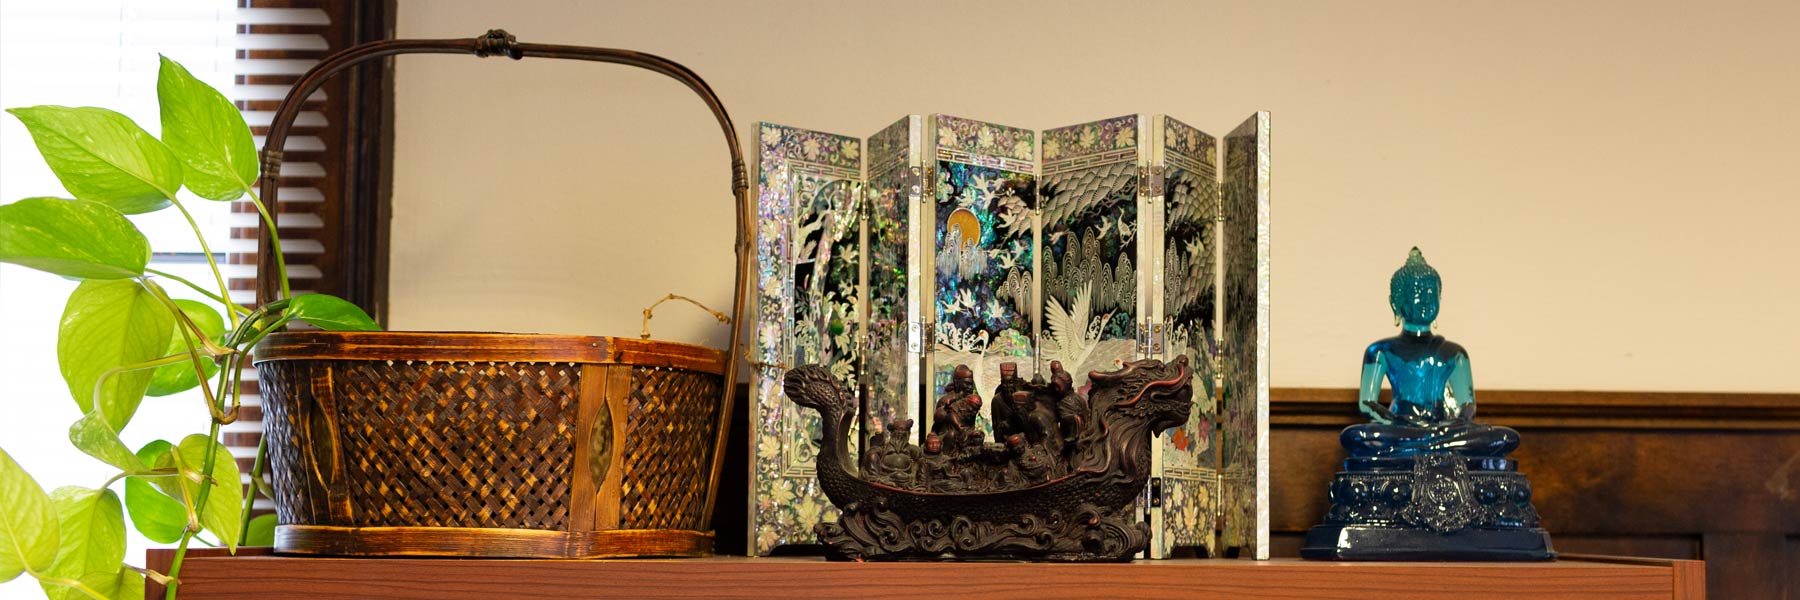 A collection of art and culture-related objects, including a woven basket holding a variegated pothos plant, a decorated miniature Asian room screen, a carved wooden boat, and a blue blown glass statue of the Buddha. 